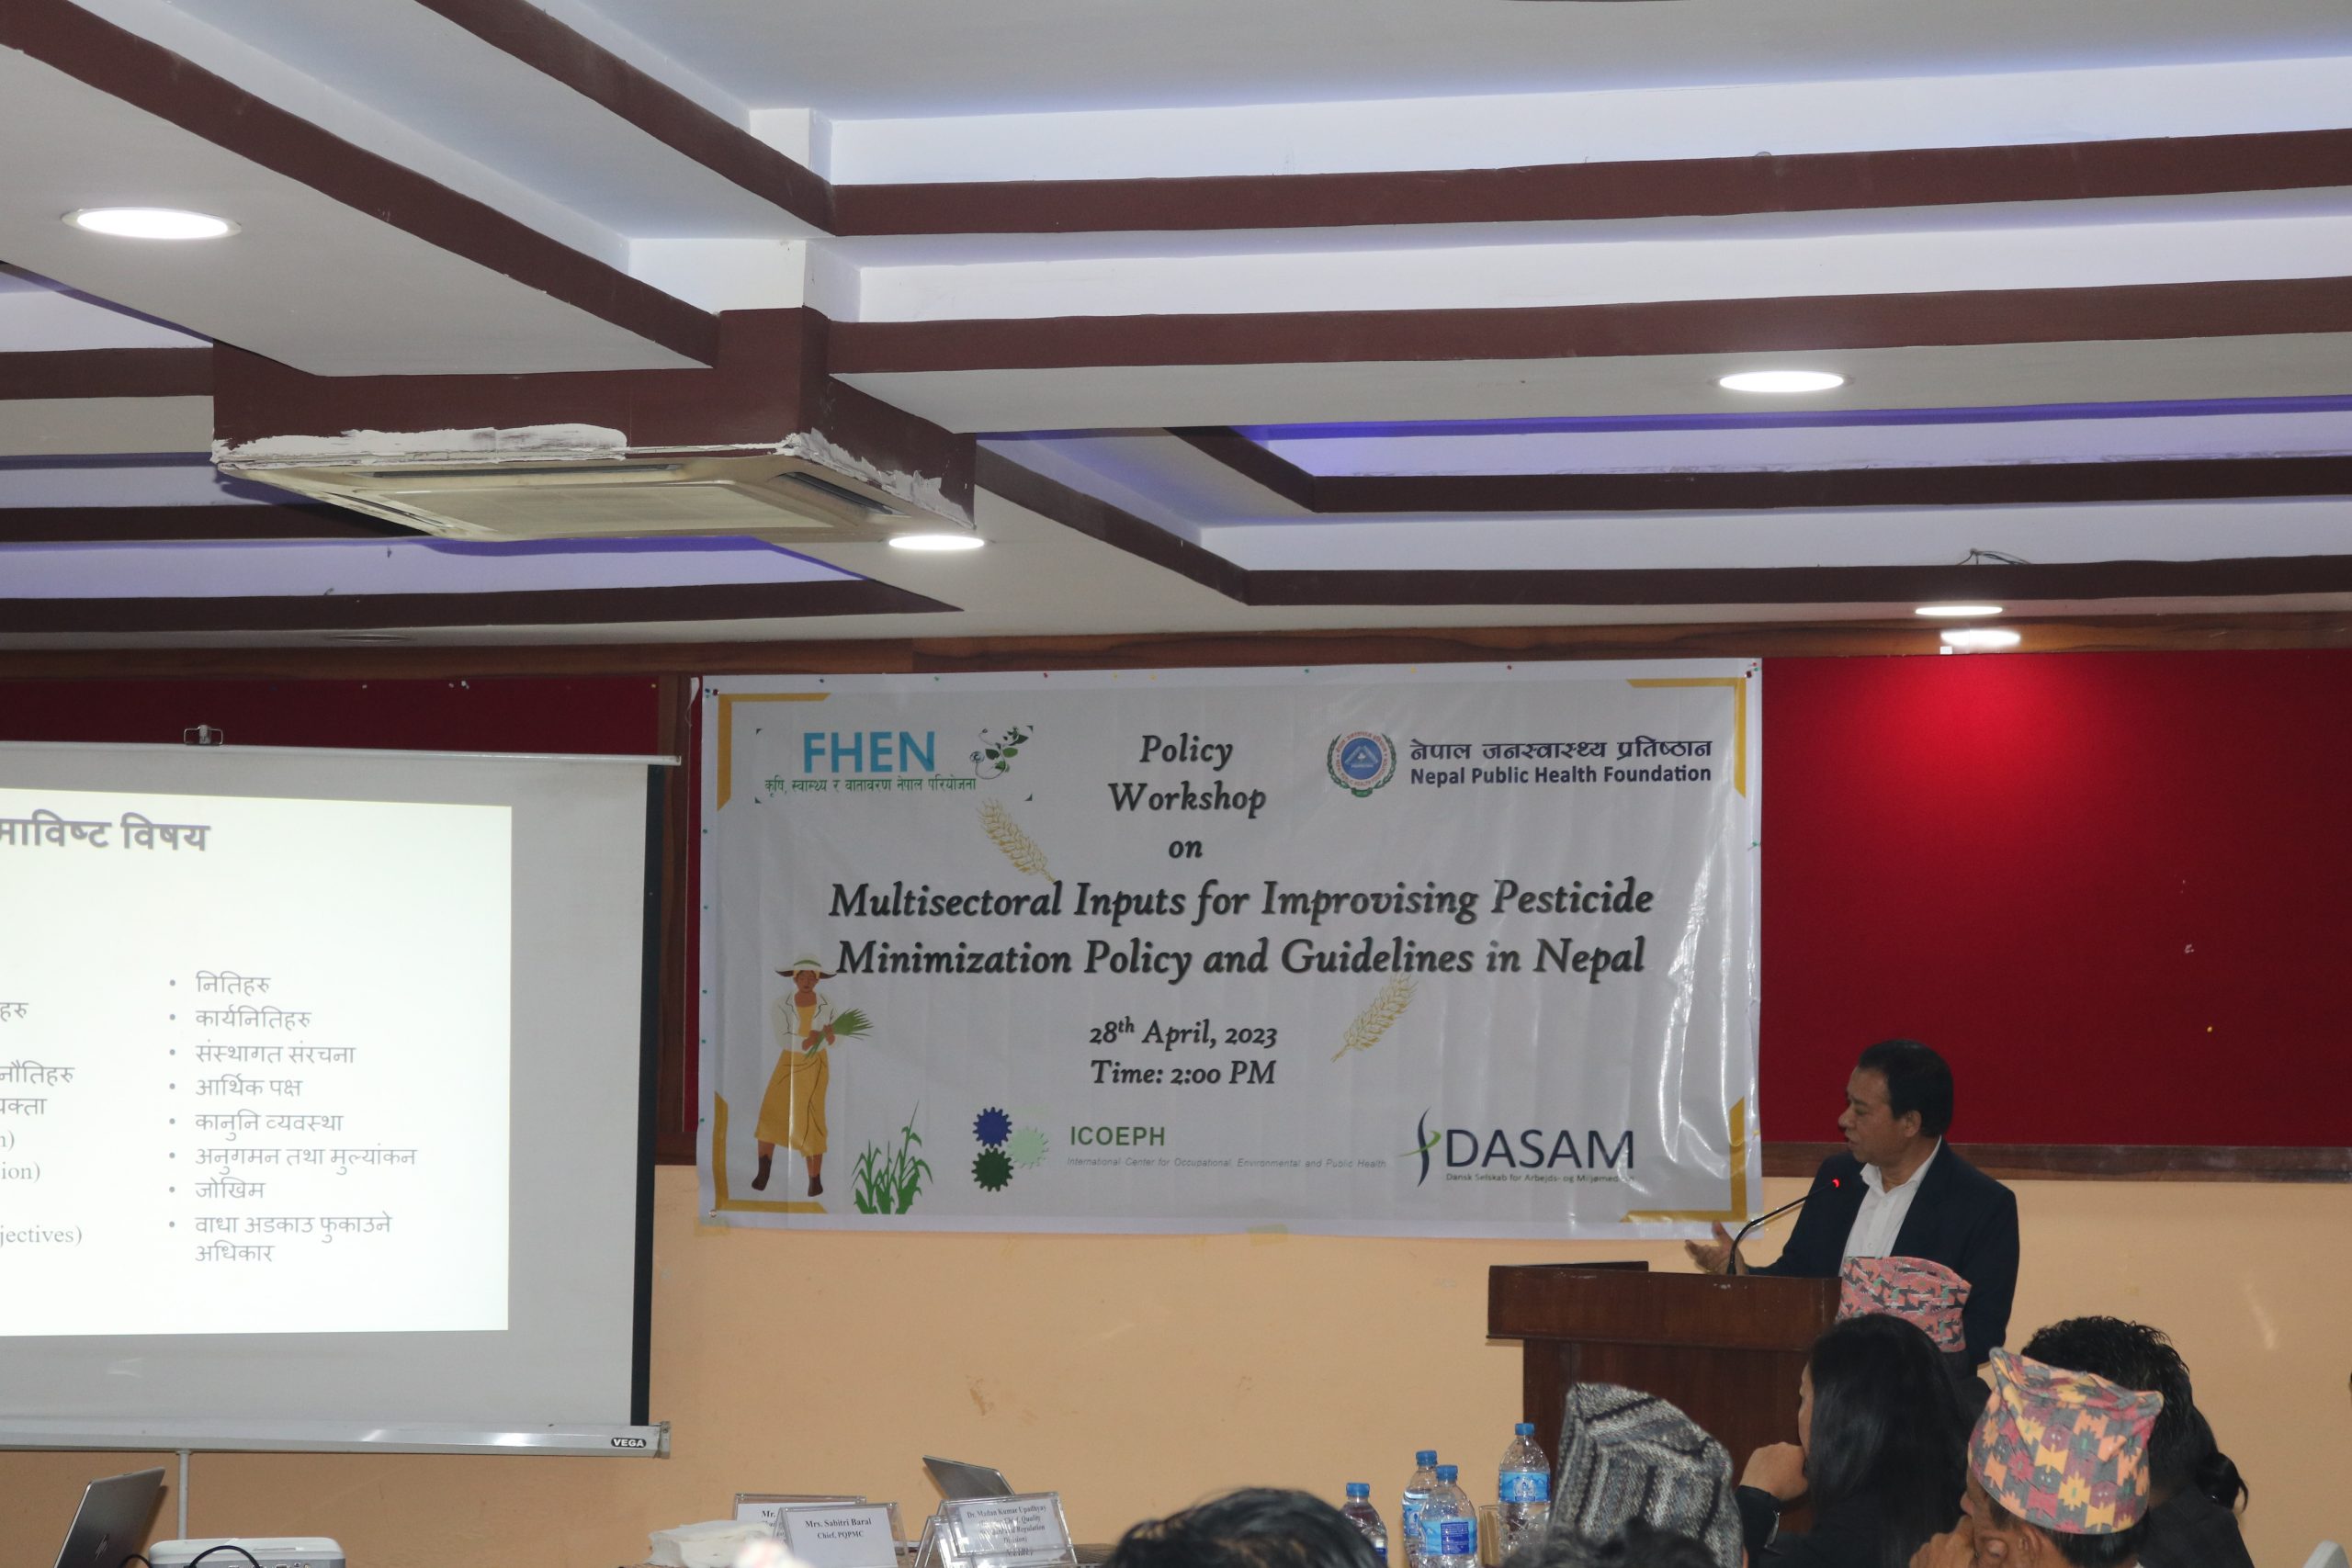 Policy Workshop on Multisectoral Inputs for Improvising Pesticide Minimization Policy and Guidelines in Nepal